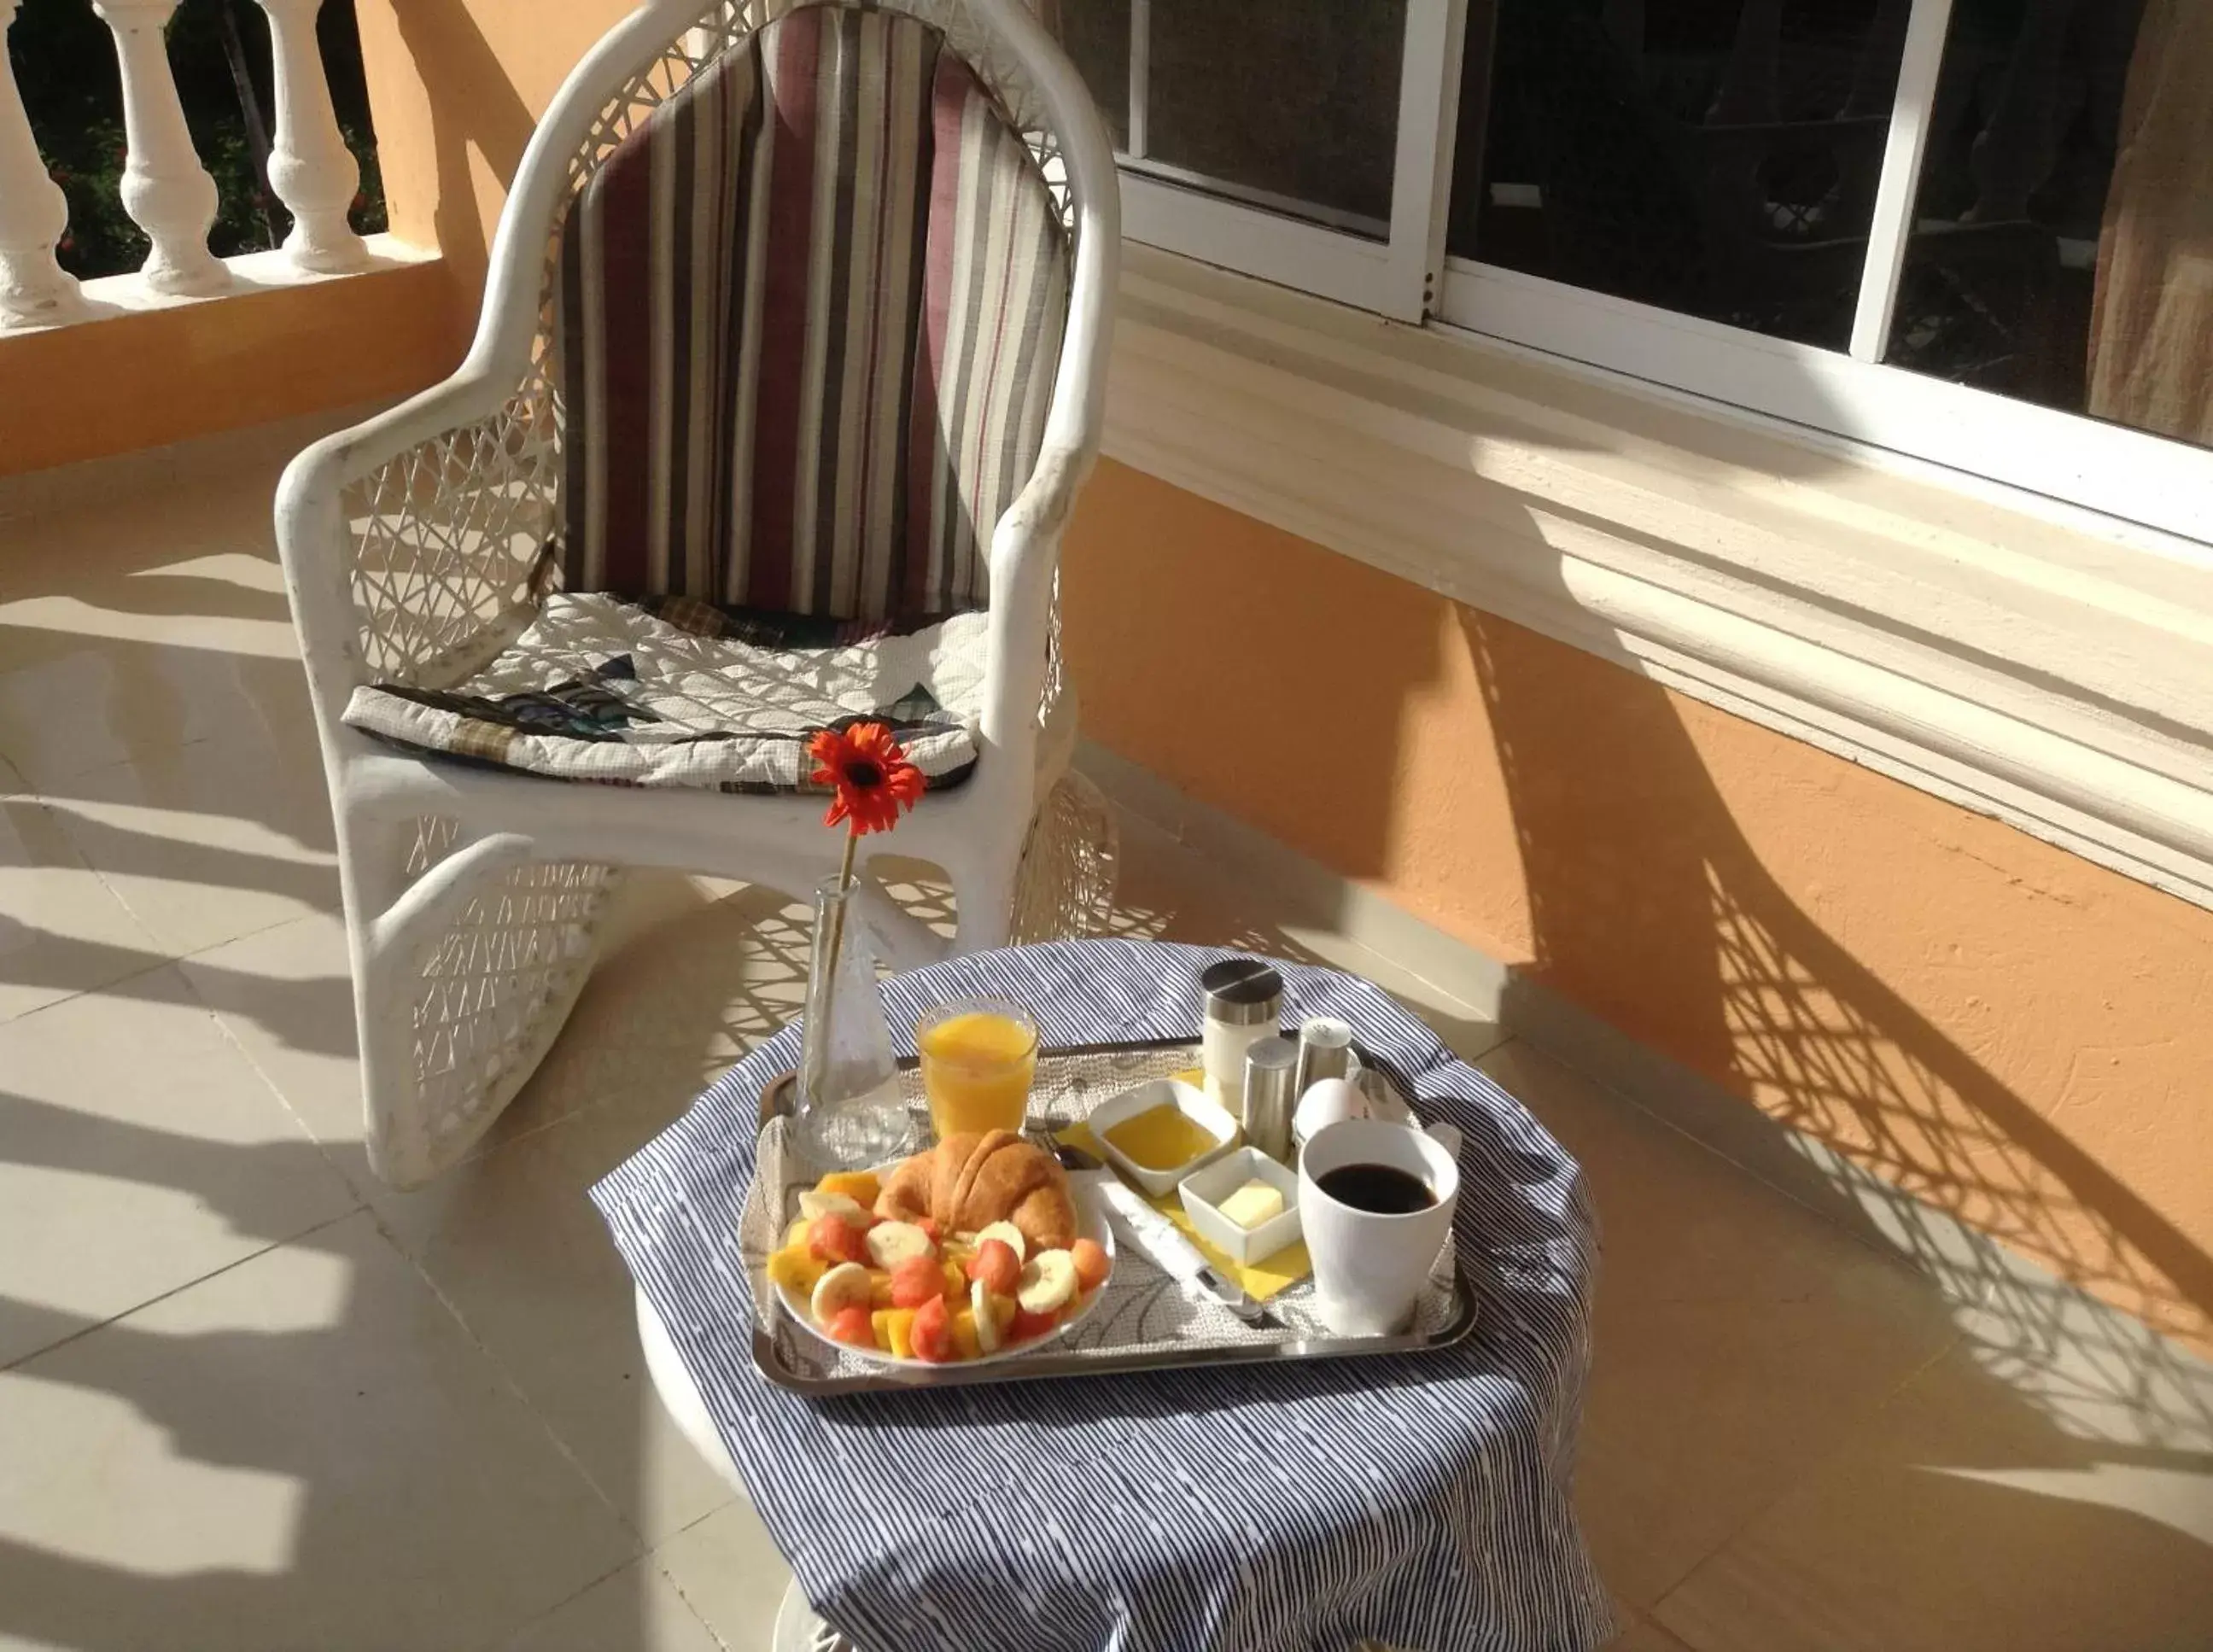 Breakfast in White Sands shared apartments